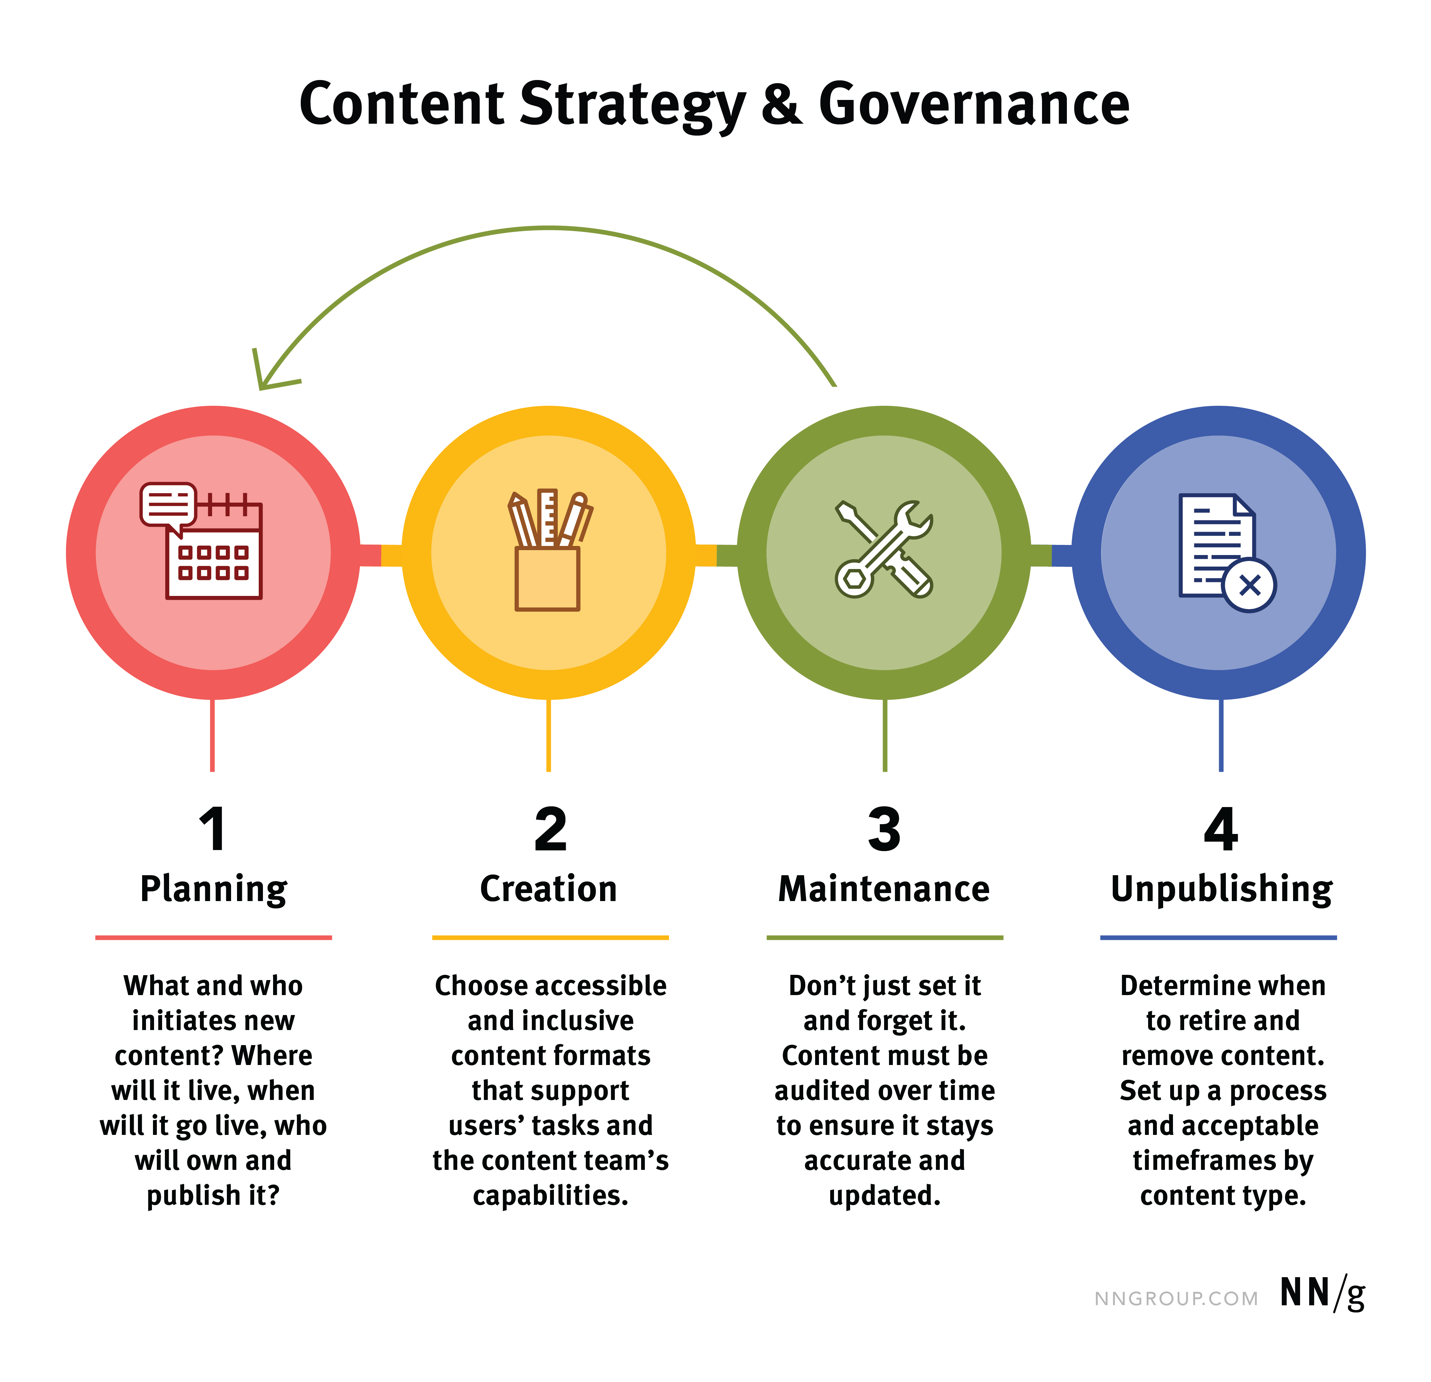 An infographic that shows the key elements of a content strategy, which are: planning, creation, maintenance, and unpublishing. 